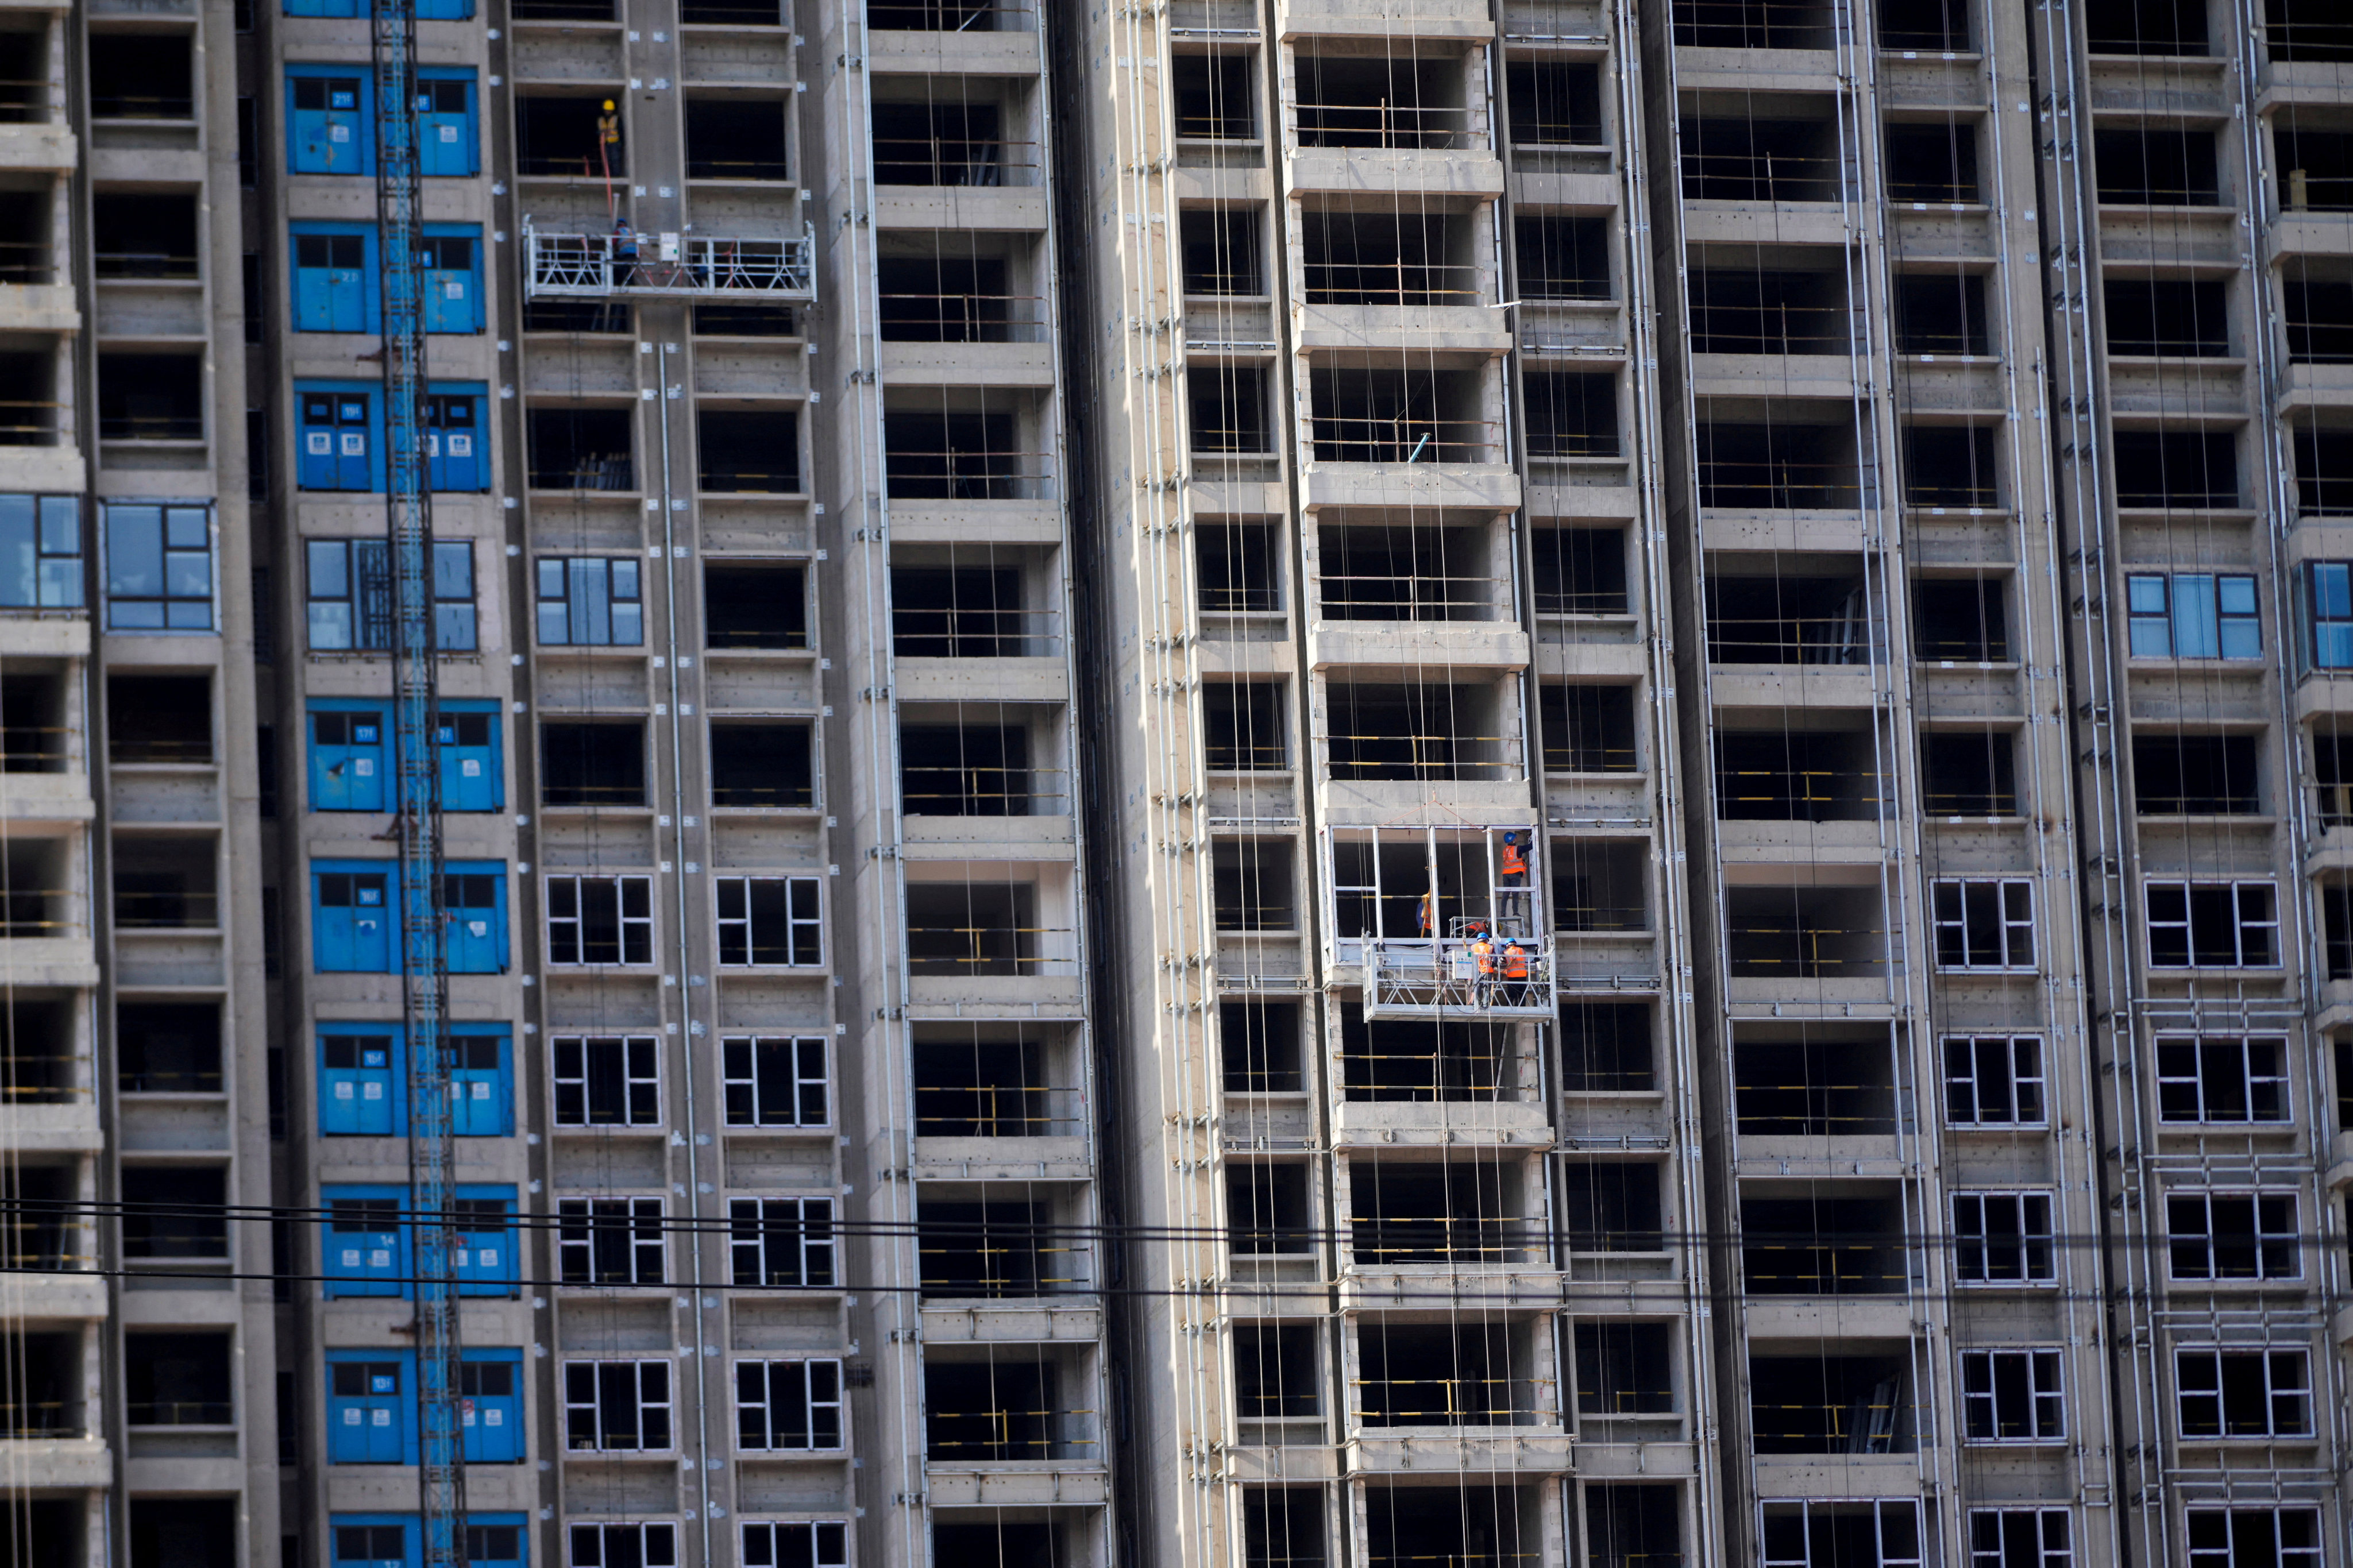 The average price of newly completed homes in China rose last month in 36 of the 70 cities tracked, more than double the 15 recorded in December. Photo: Reuters